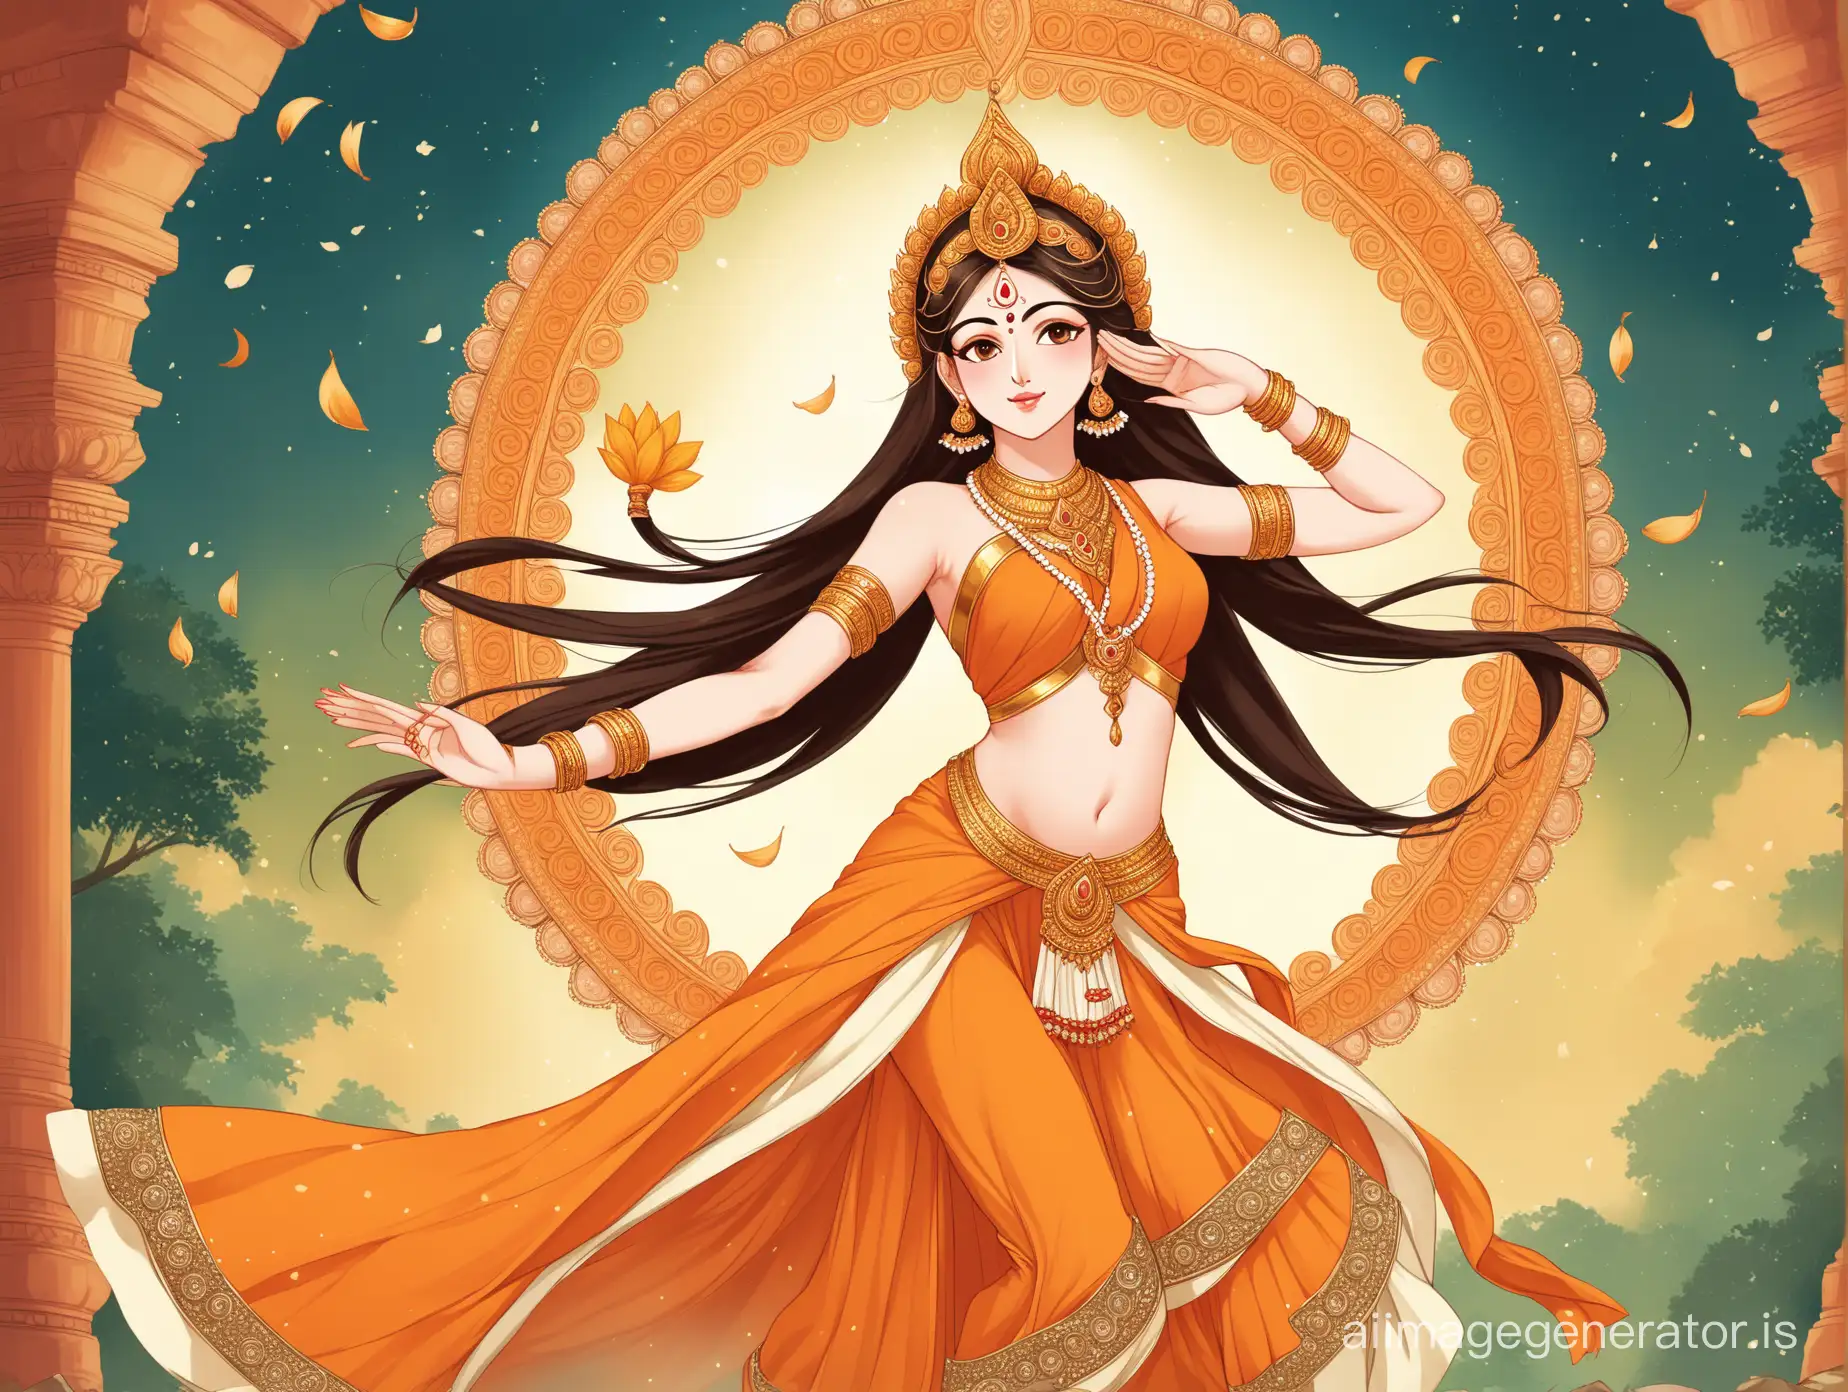 Ethereal-Dance-of-Goddess-Sita-in-Devotion-to-Lord-Ram